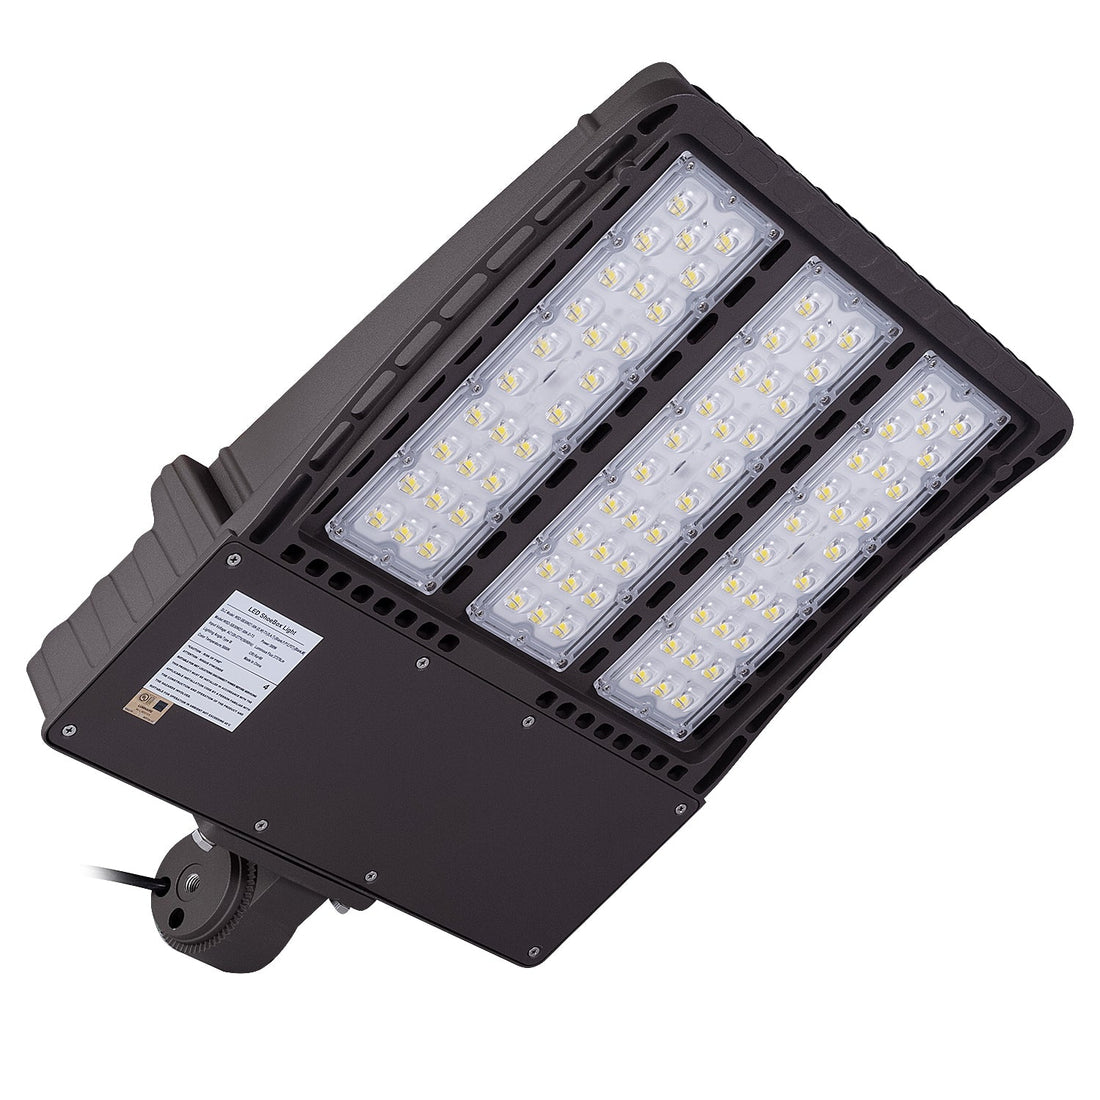 LED Shoebox Light with 300W for Outdoor Street Area Lighting, 5000K, Direct Mount  - 42132Lumens - AC120-277V - 0-10V Dimmable, IP66 - UL Listed - DLC Premium Listed - 5 Years Warranty